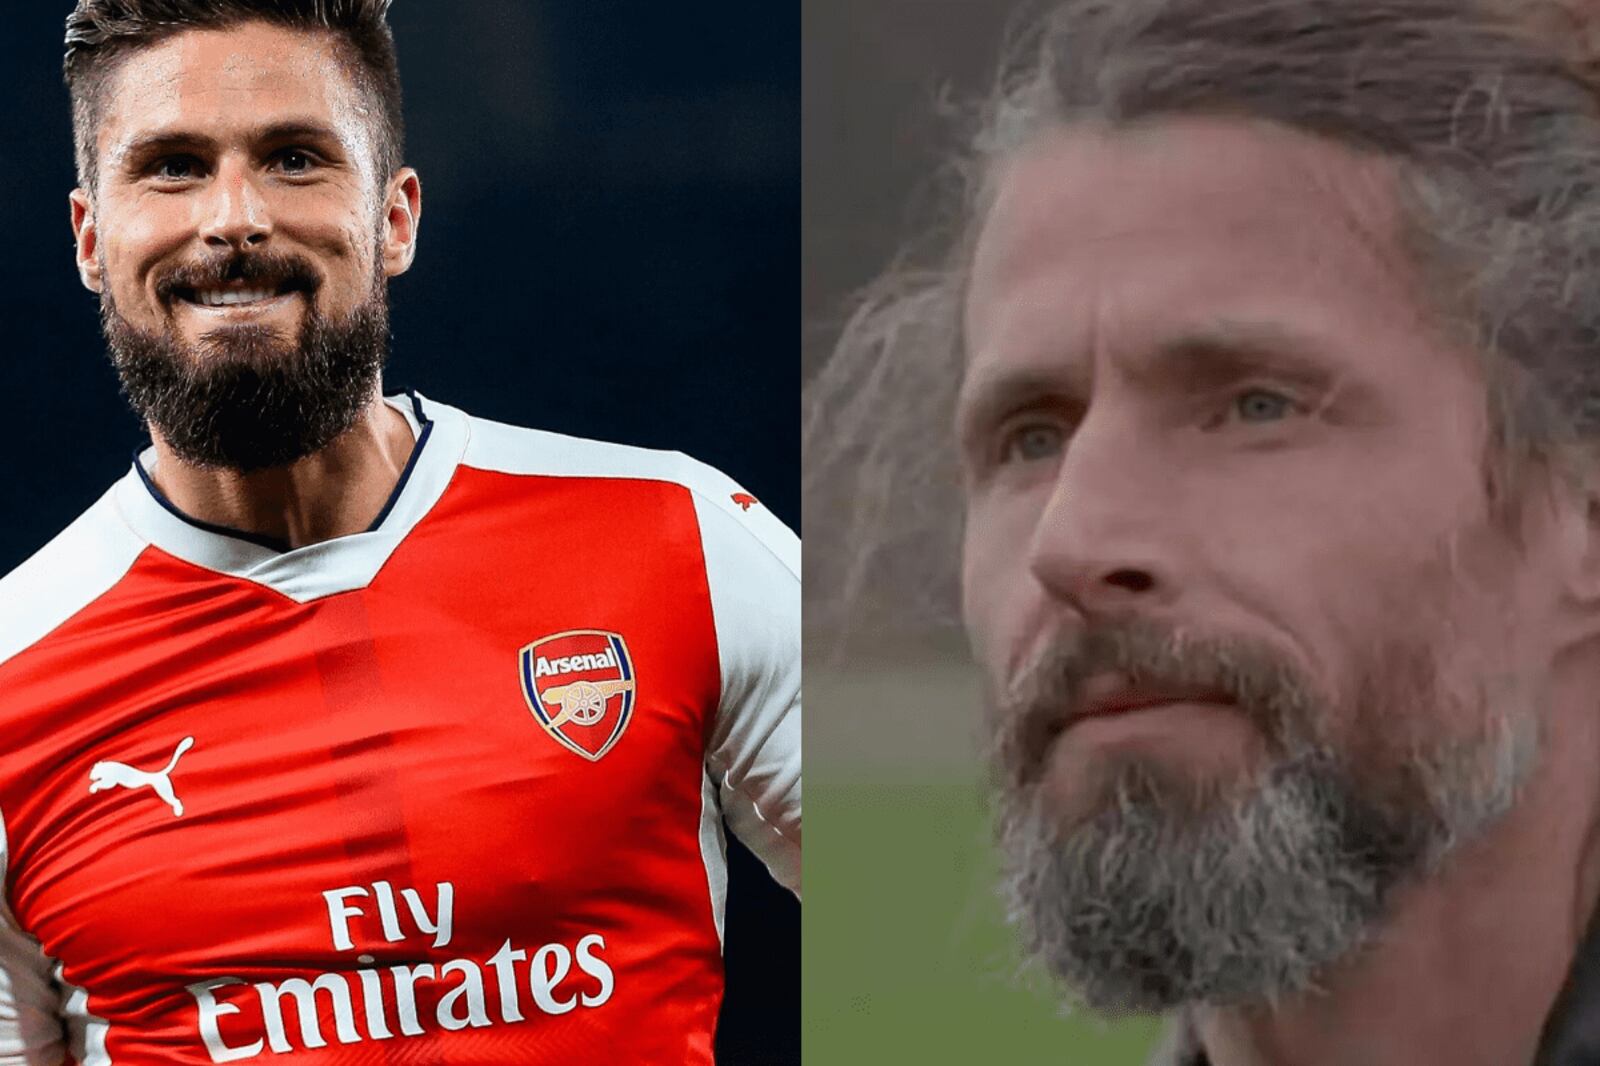 The lookalike brother of a Premier League star quit football to have a surprising job